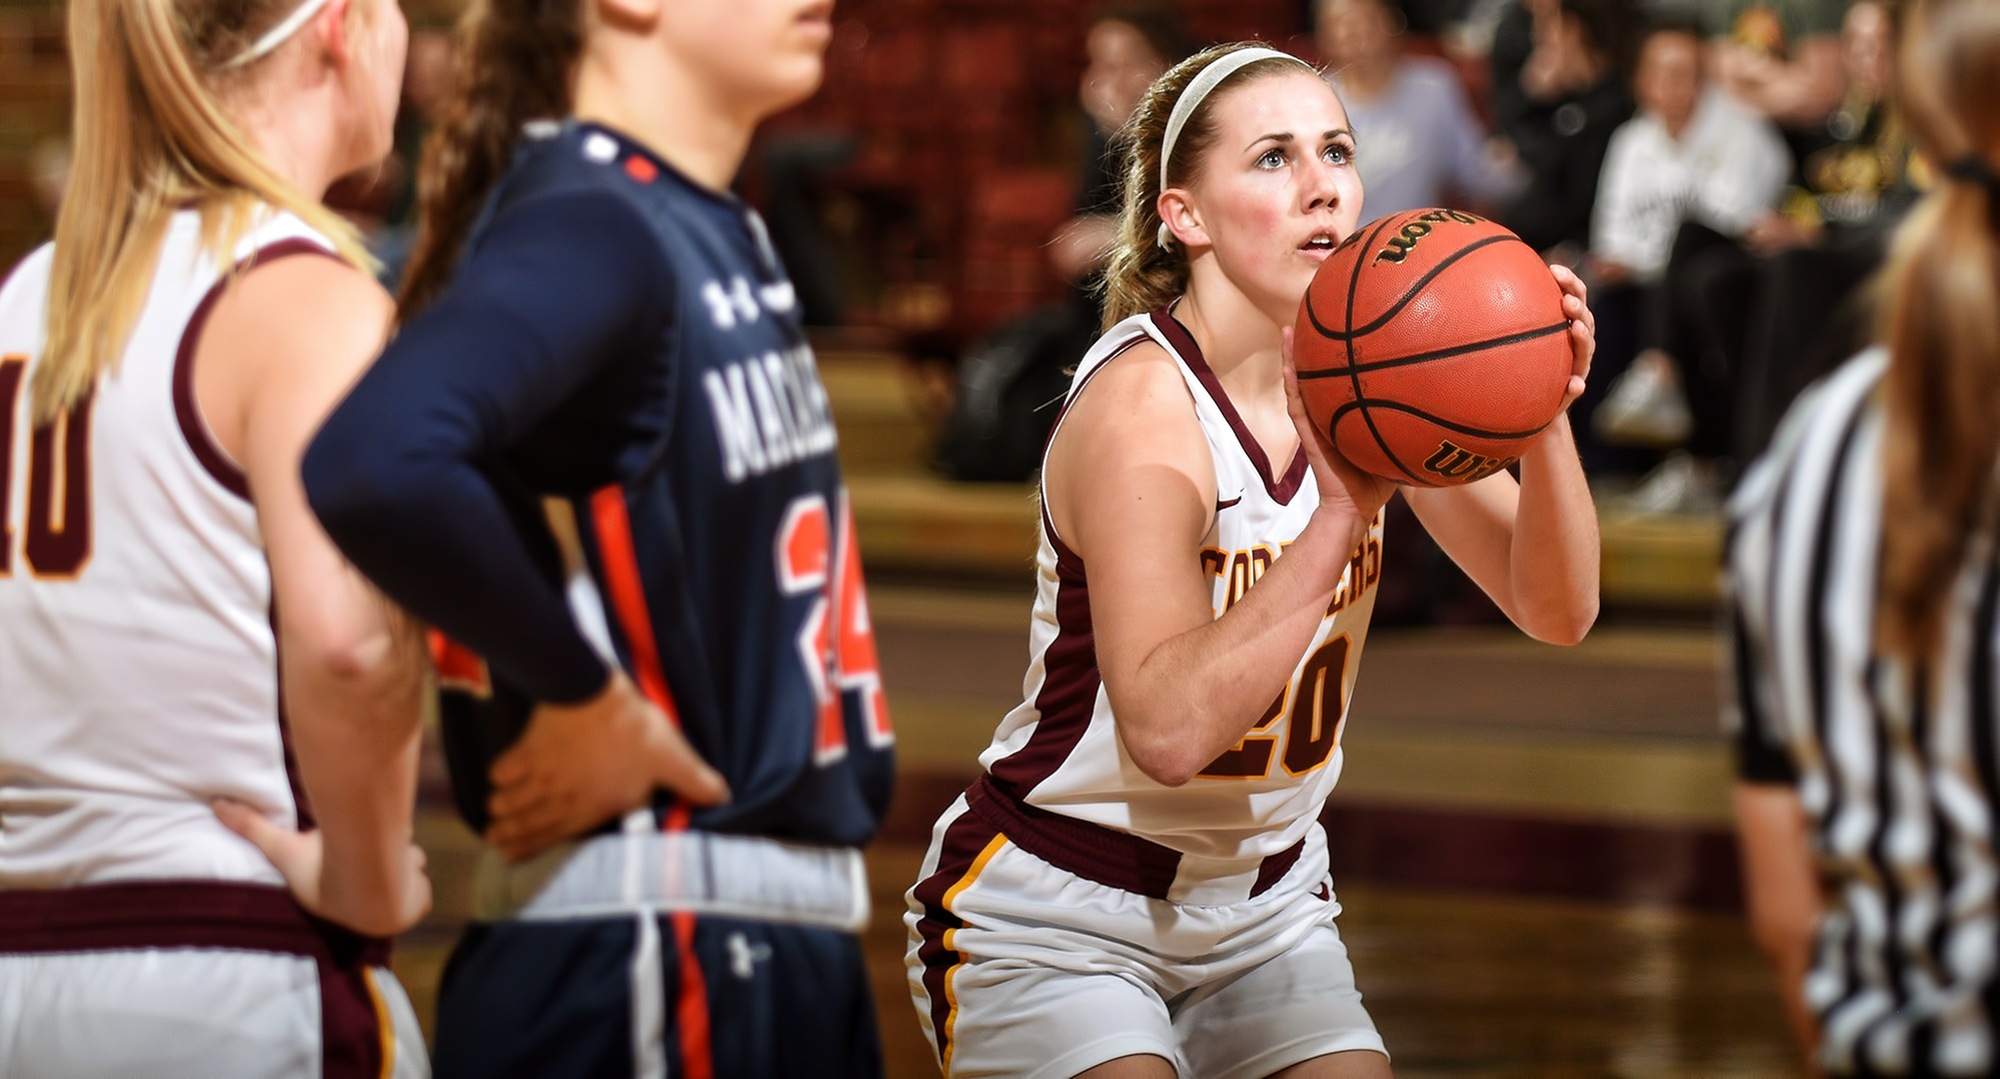 Freshman Emily Beseman connects on one of her game-high 12 free throws in the Cobbers' win over Macalester. She was 12-for-12 from the line and finished with a game-high 17 points.